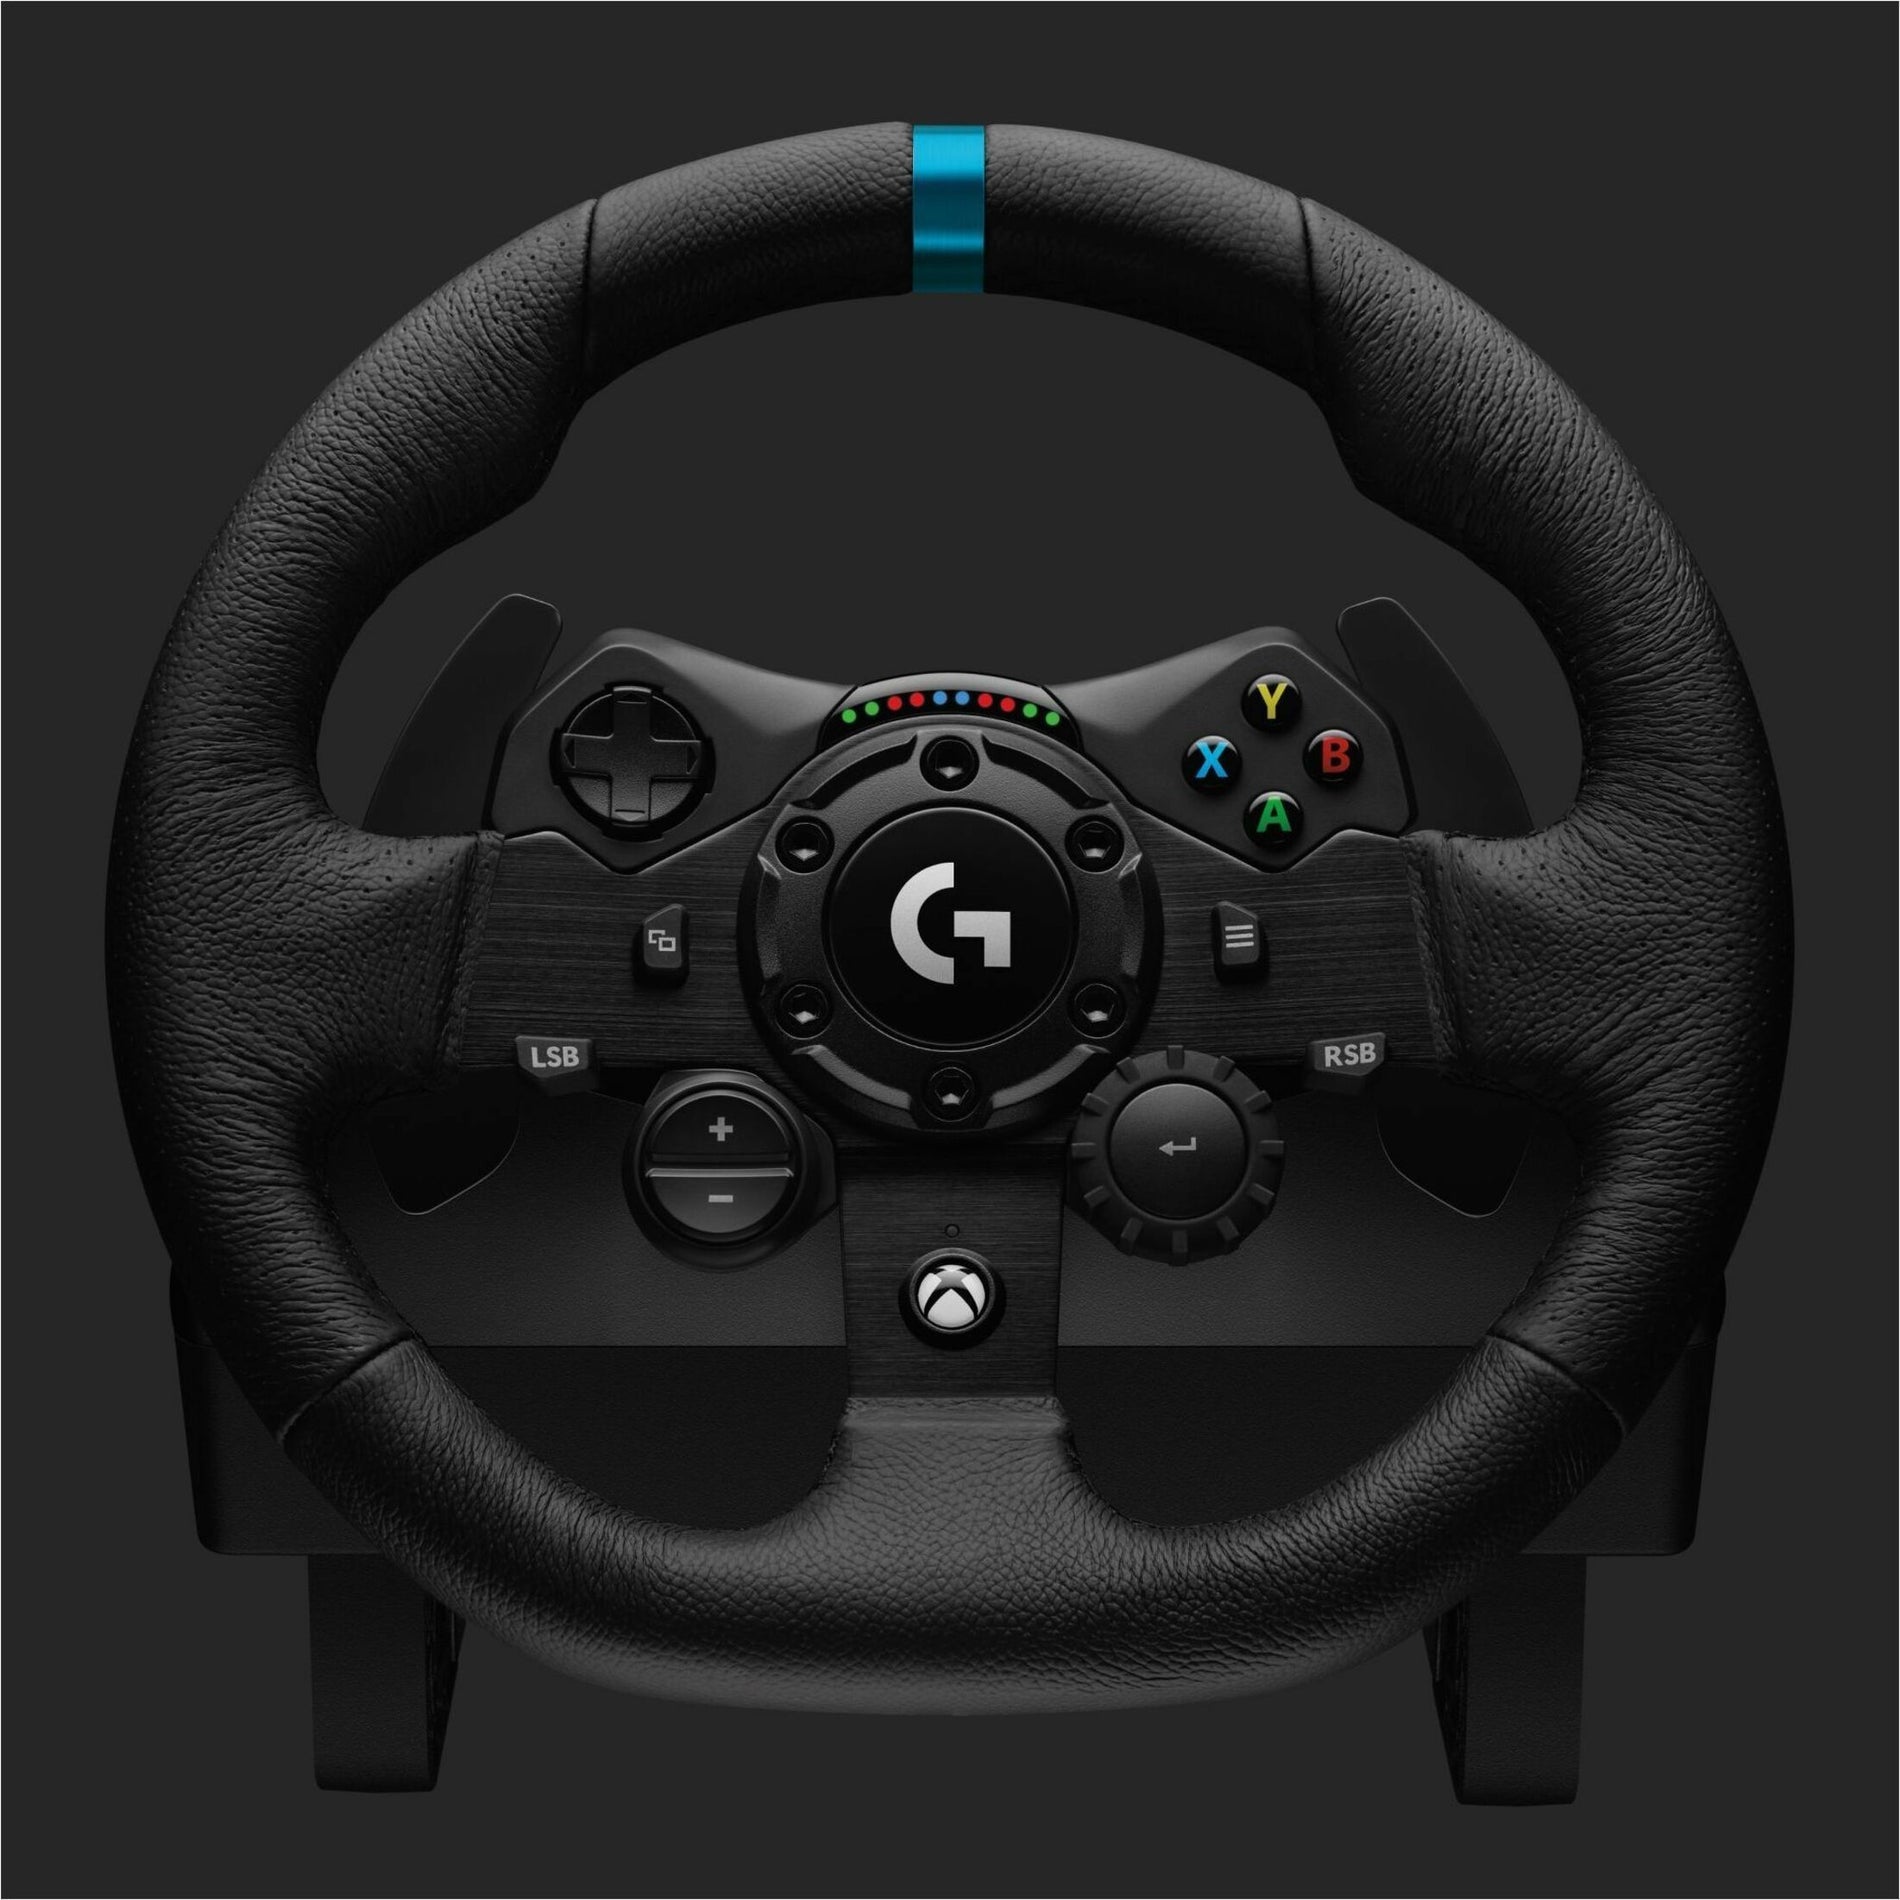 Logitech 941-000156 G923 TRUEFORCE Racing wheel for Xbox, PlayStation and PC, 2 Year Limited Warranty, USB Connectivity, Black